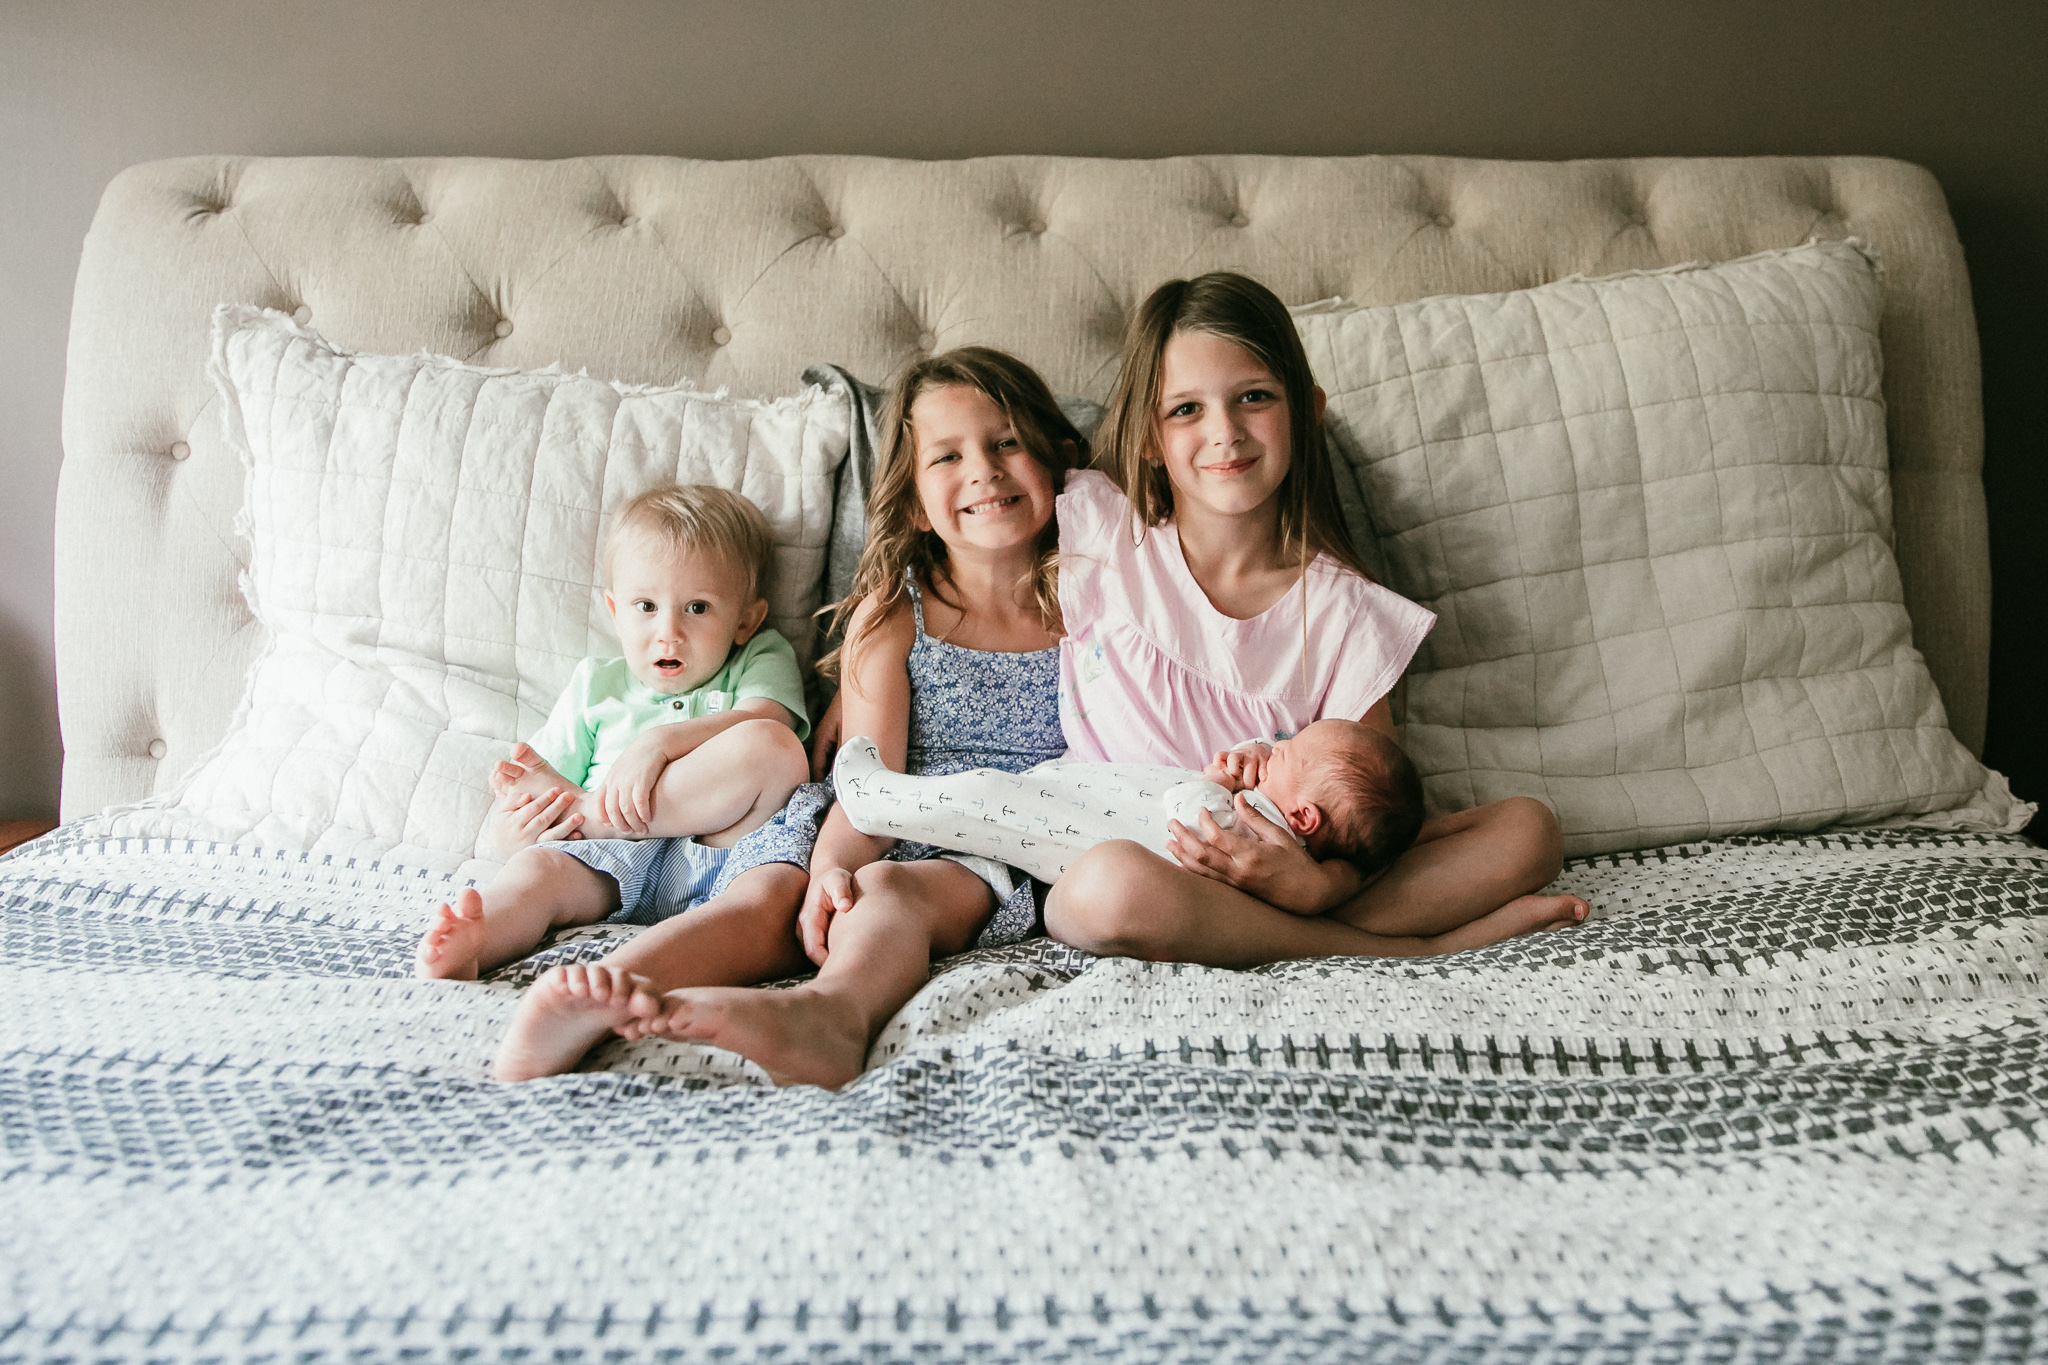 Kansas City Child Photography at Home by Merry Ohler